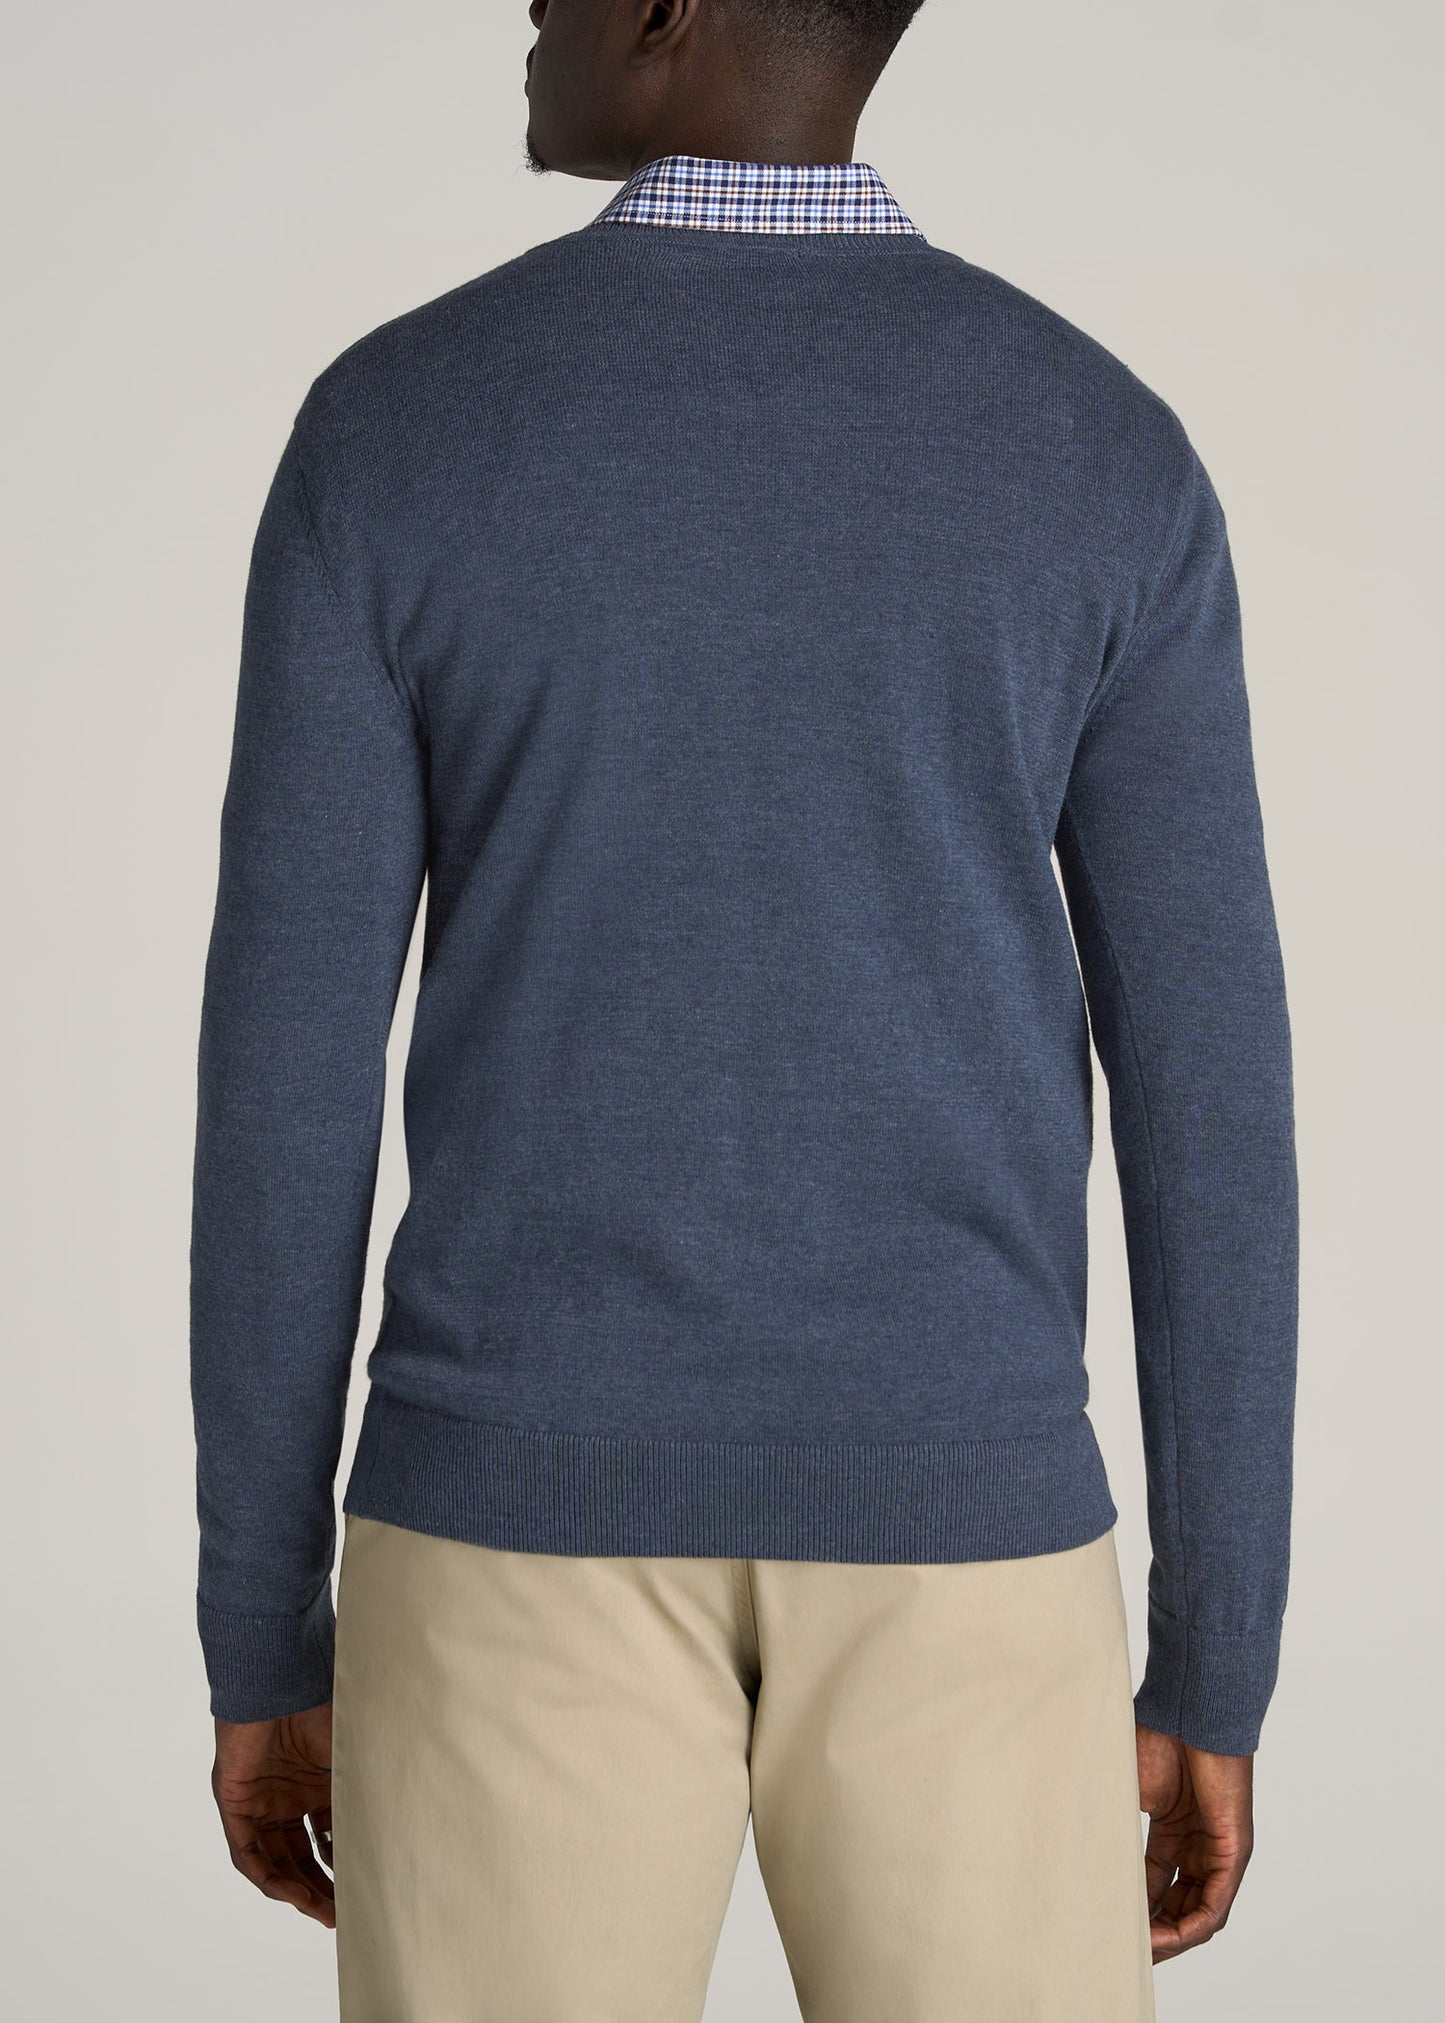    American-Tall-Men-Everyday-V-Neck-Sweater-Navy-Mix-back